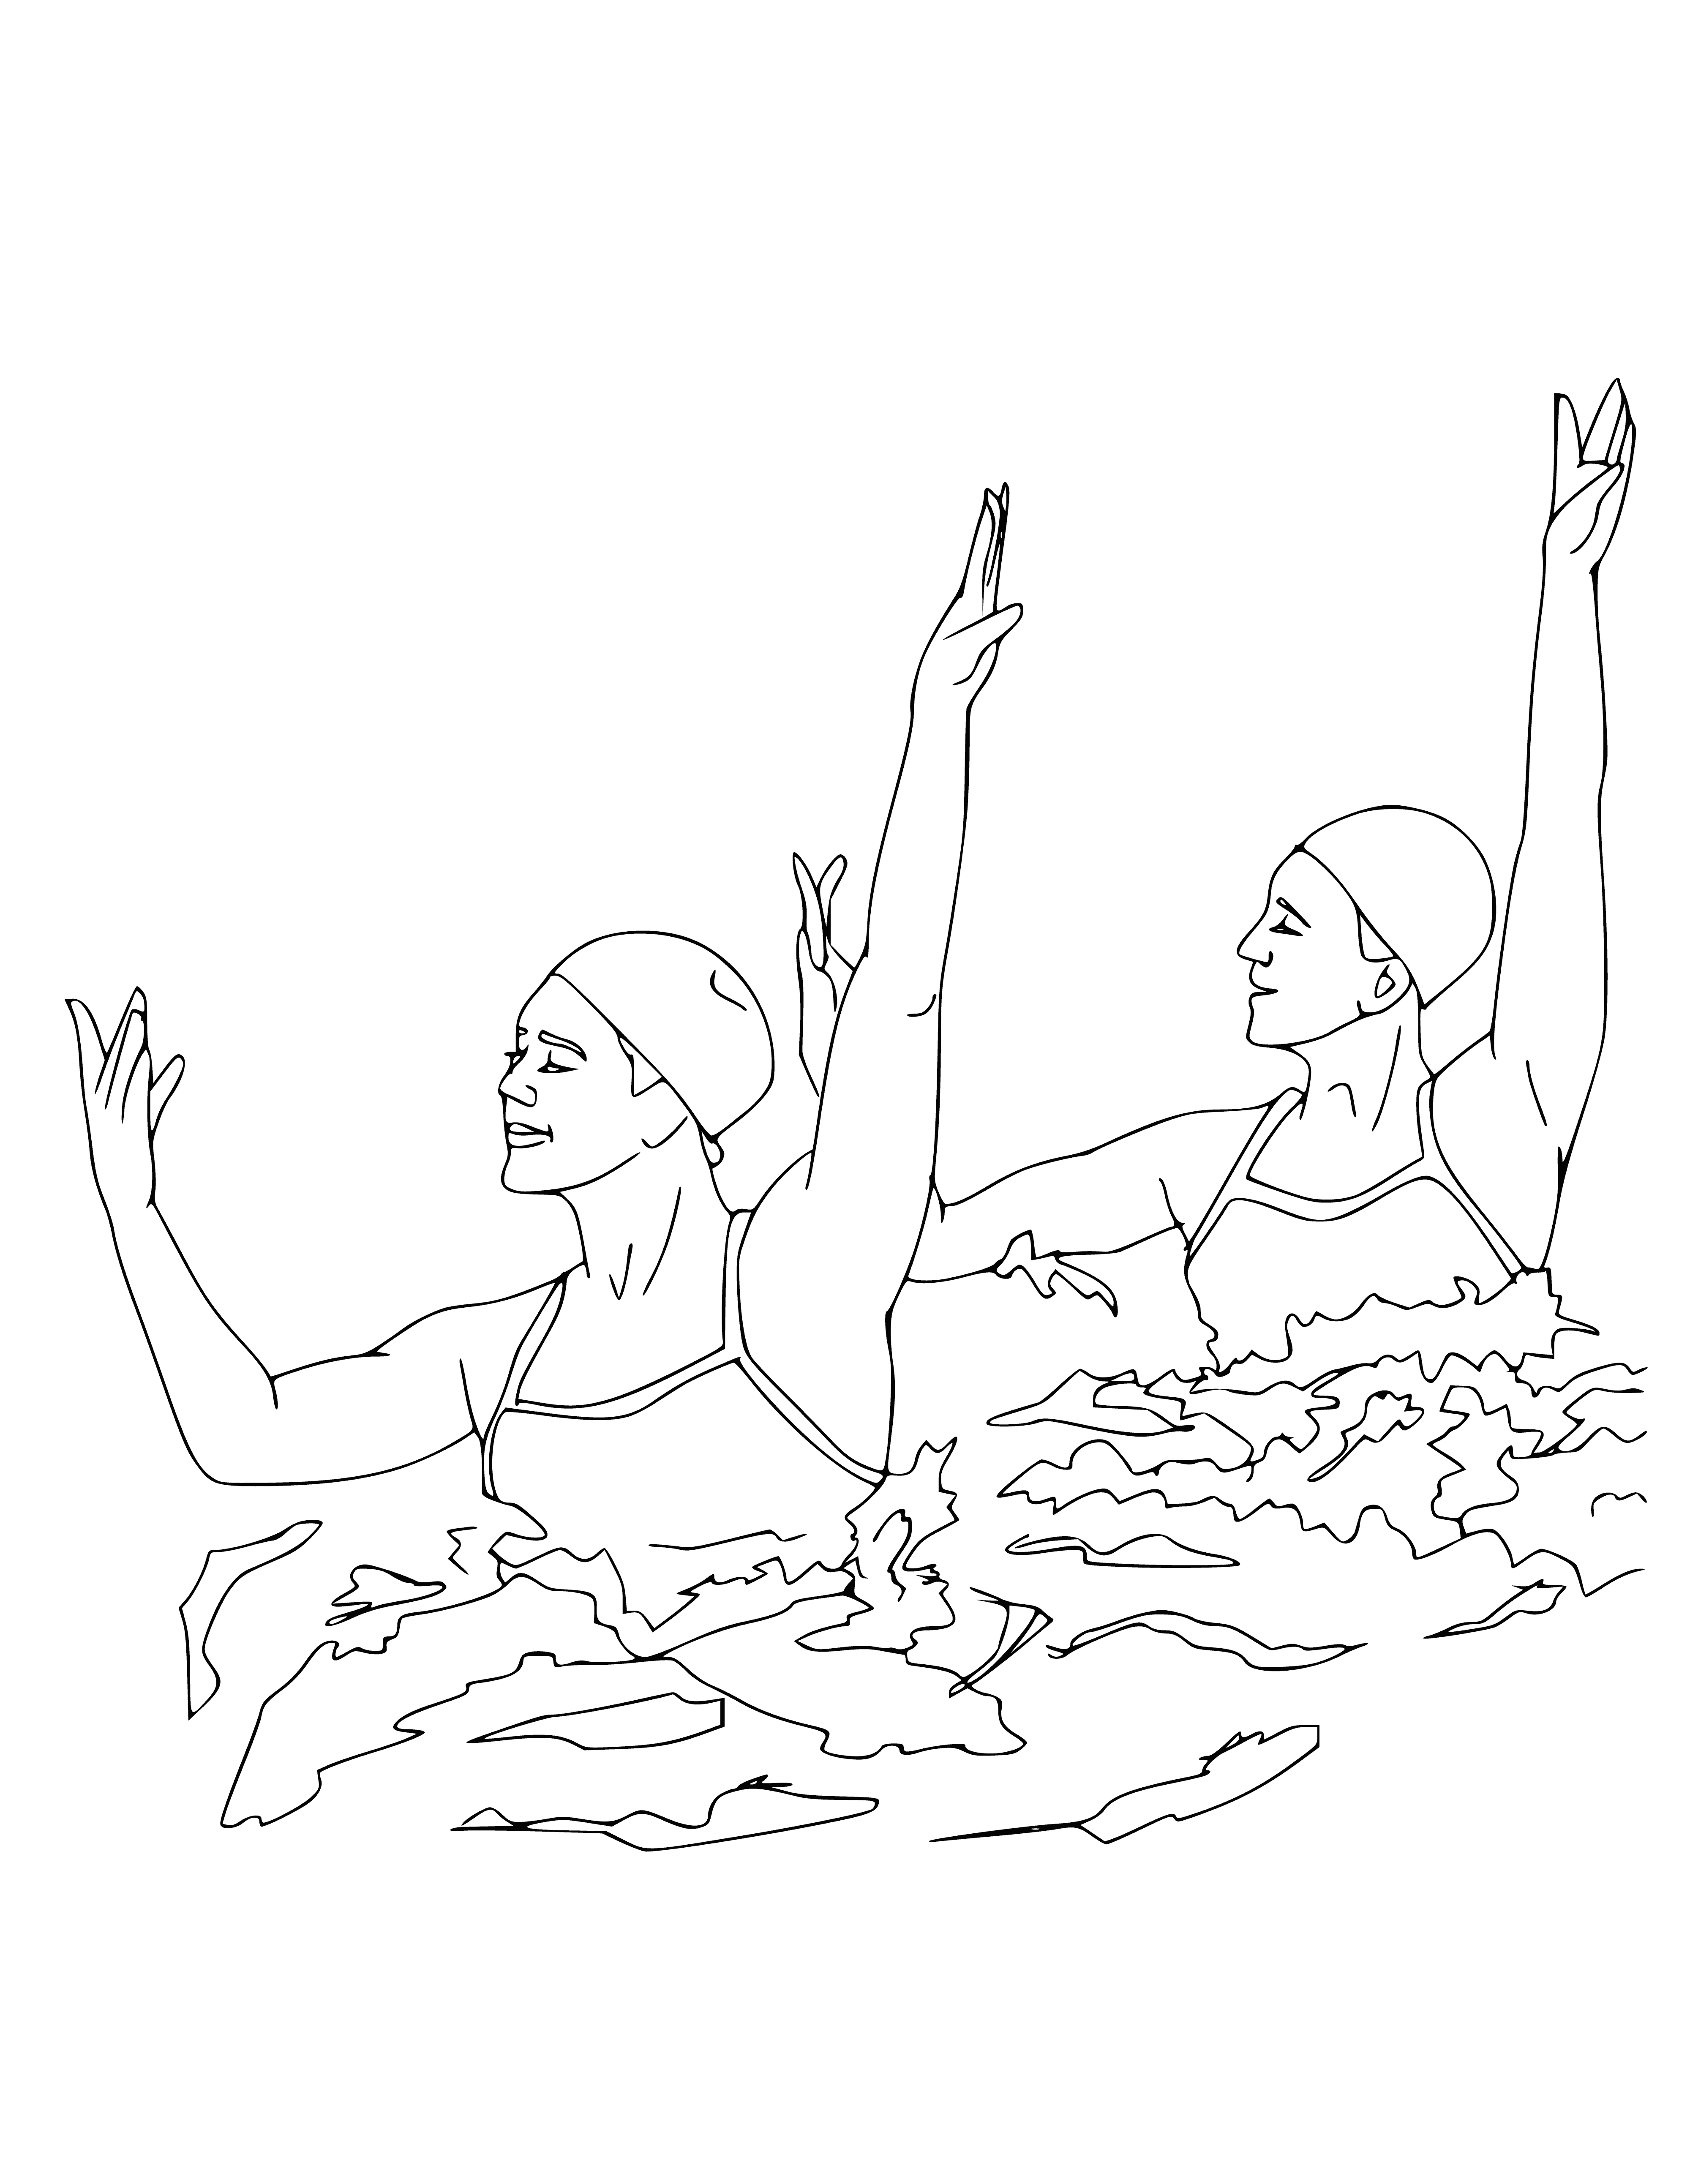 Synchronized swimming coloring page